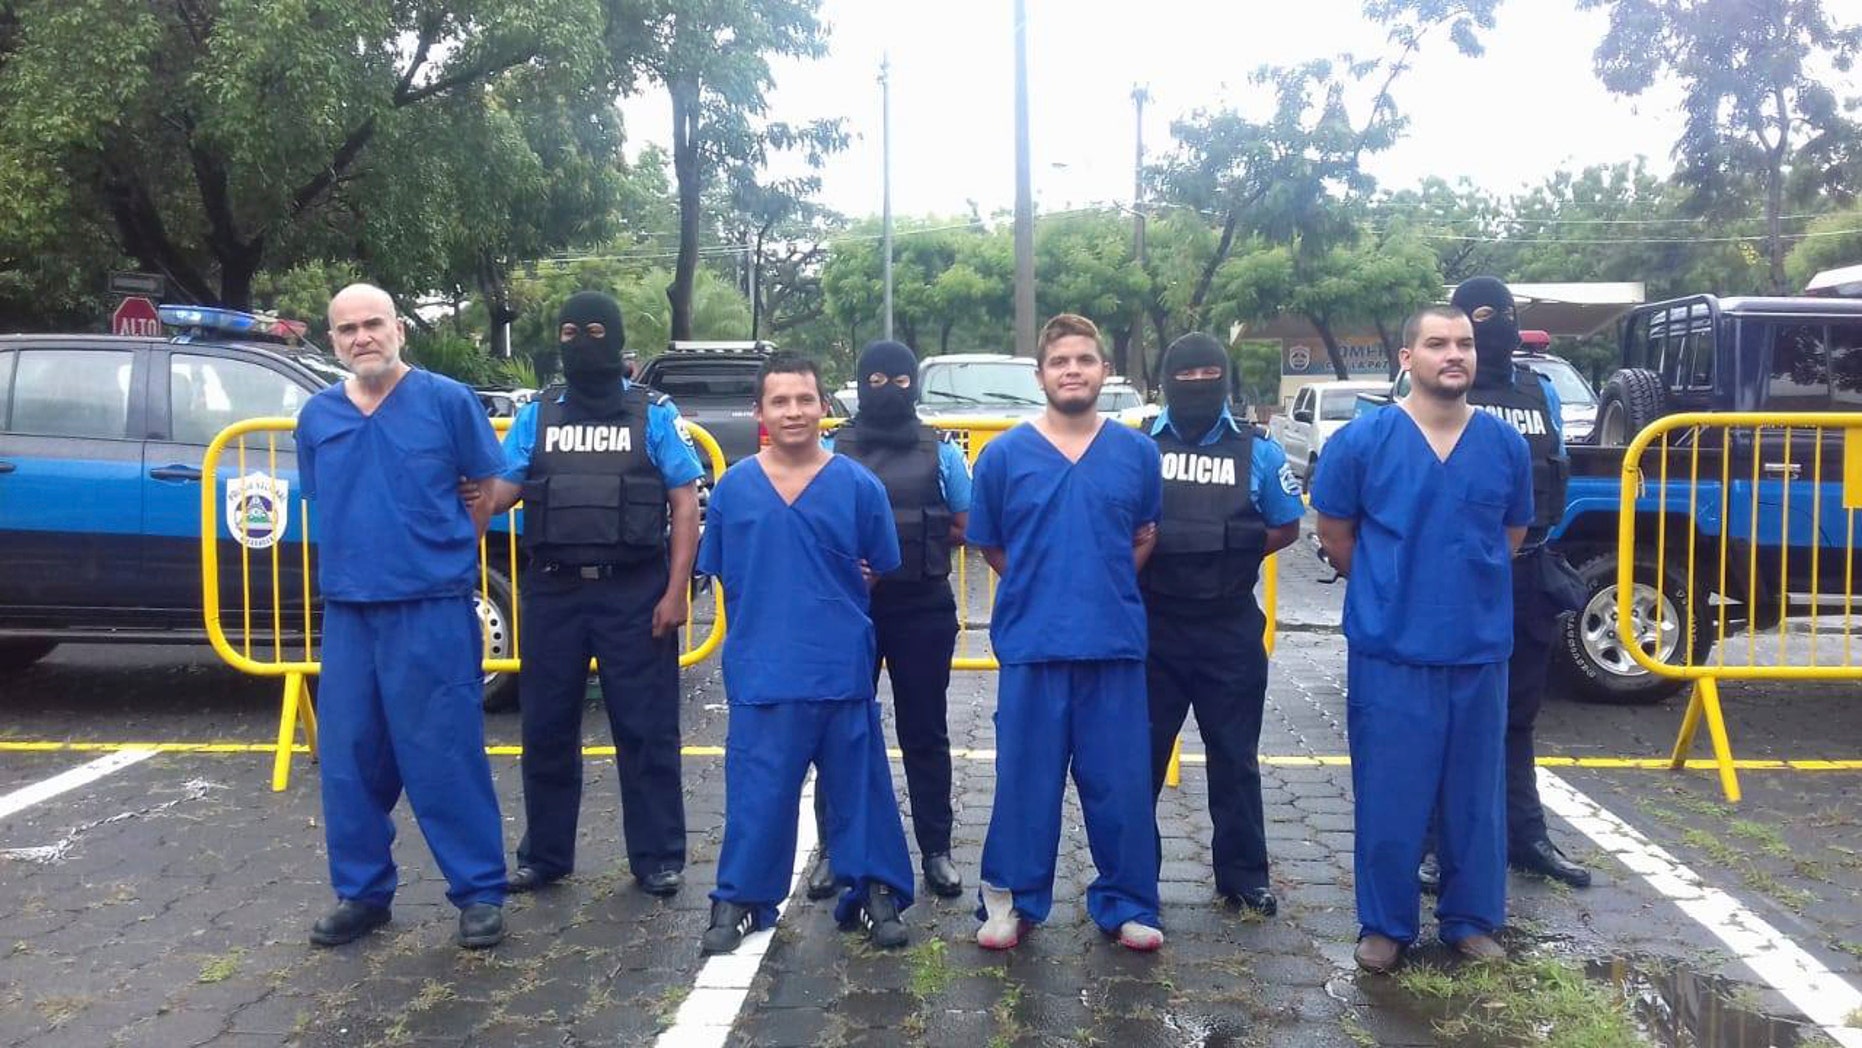 In this October 17, 2018 photo provided by the Nicaraguan National Police, prisoners arrested and imprisoned in recent uprisings against the government of President Daniel Ortega are shown to the press in Managua, Nicaragua. Left, Eddy Antonio Montes Praslin, shot dead in a prison north of the capital on Thursday, May 16, 2019, in the midst of unrest that injured six prison officials, Nicaragua's Interior Ministry said. . (Nicaraguan National Police via AP)